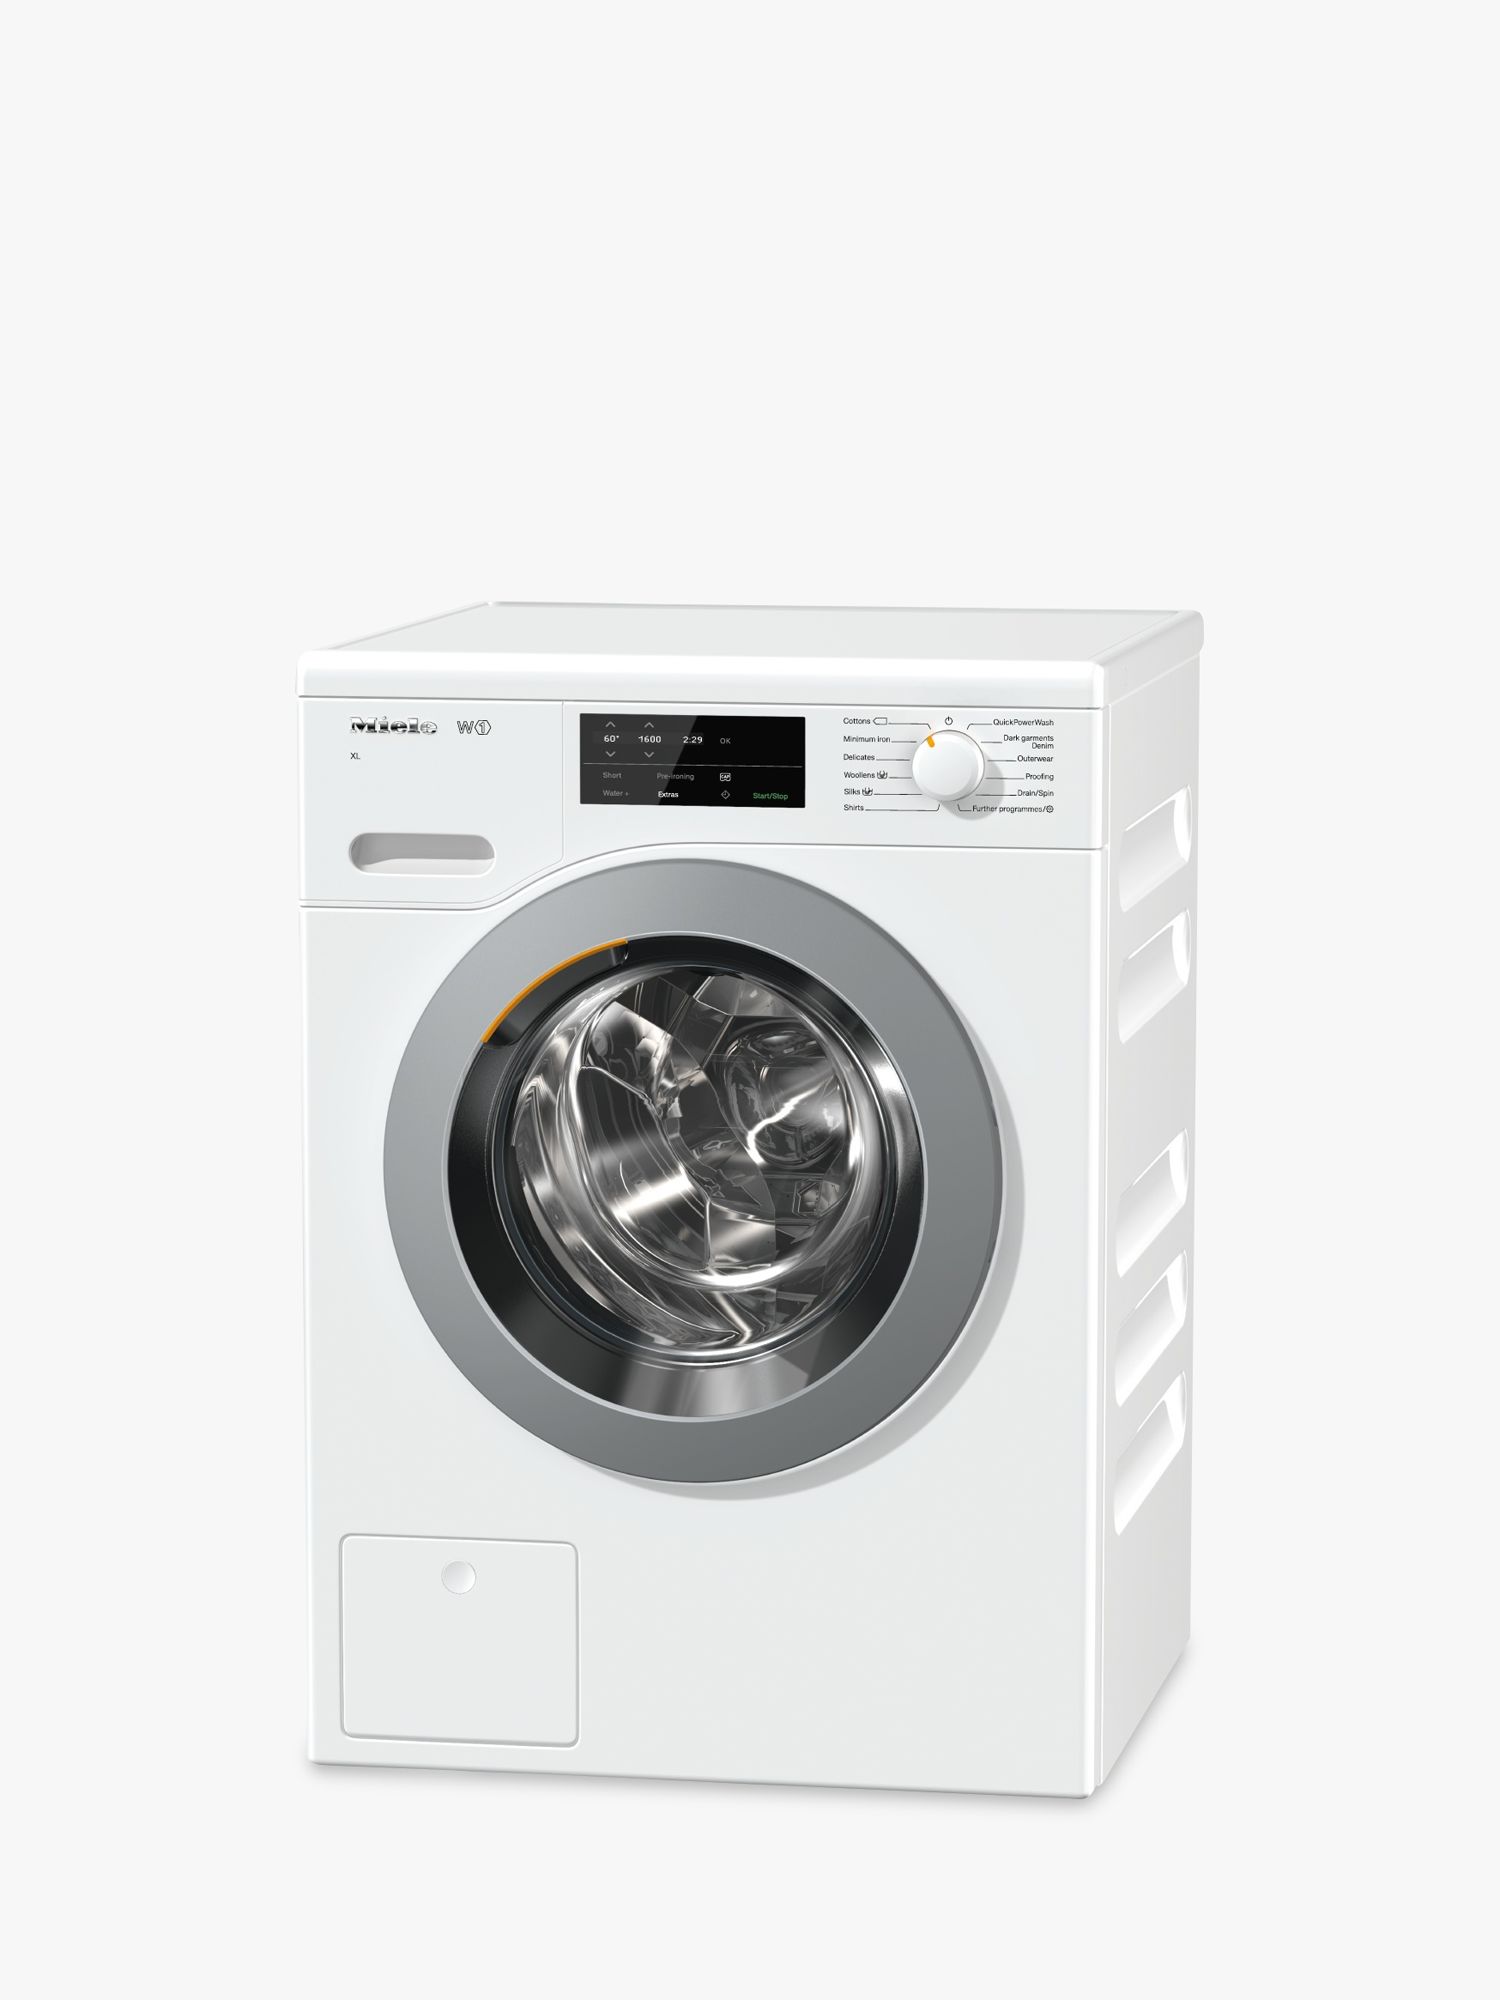 Miele WCG120 XL Freestanding Washing Machine, 9kg Load, A+++ Energy Rating, 1600rpm Spin, White